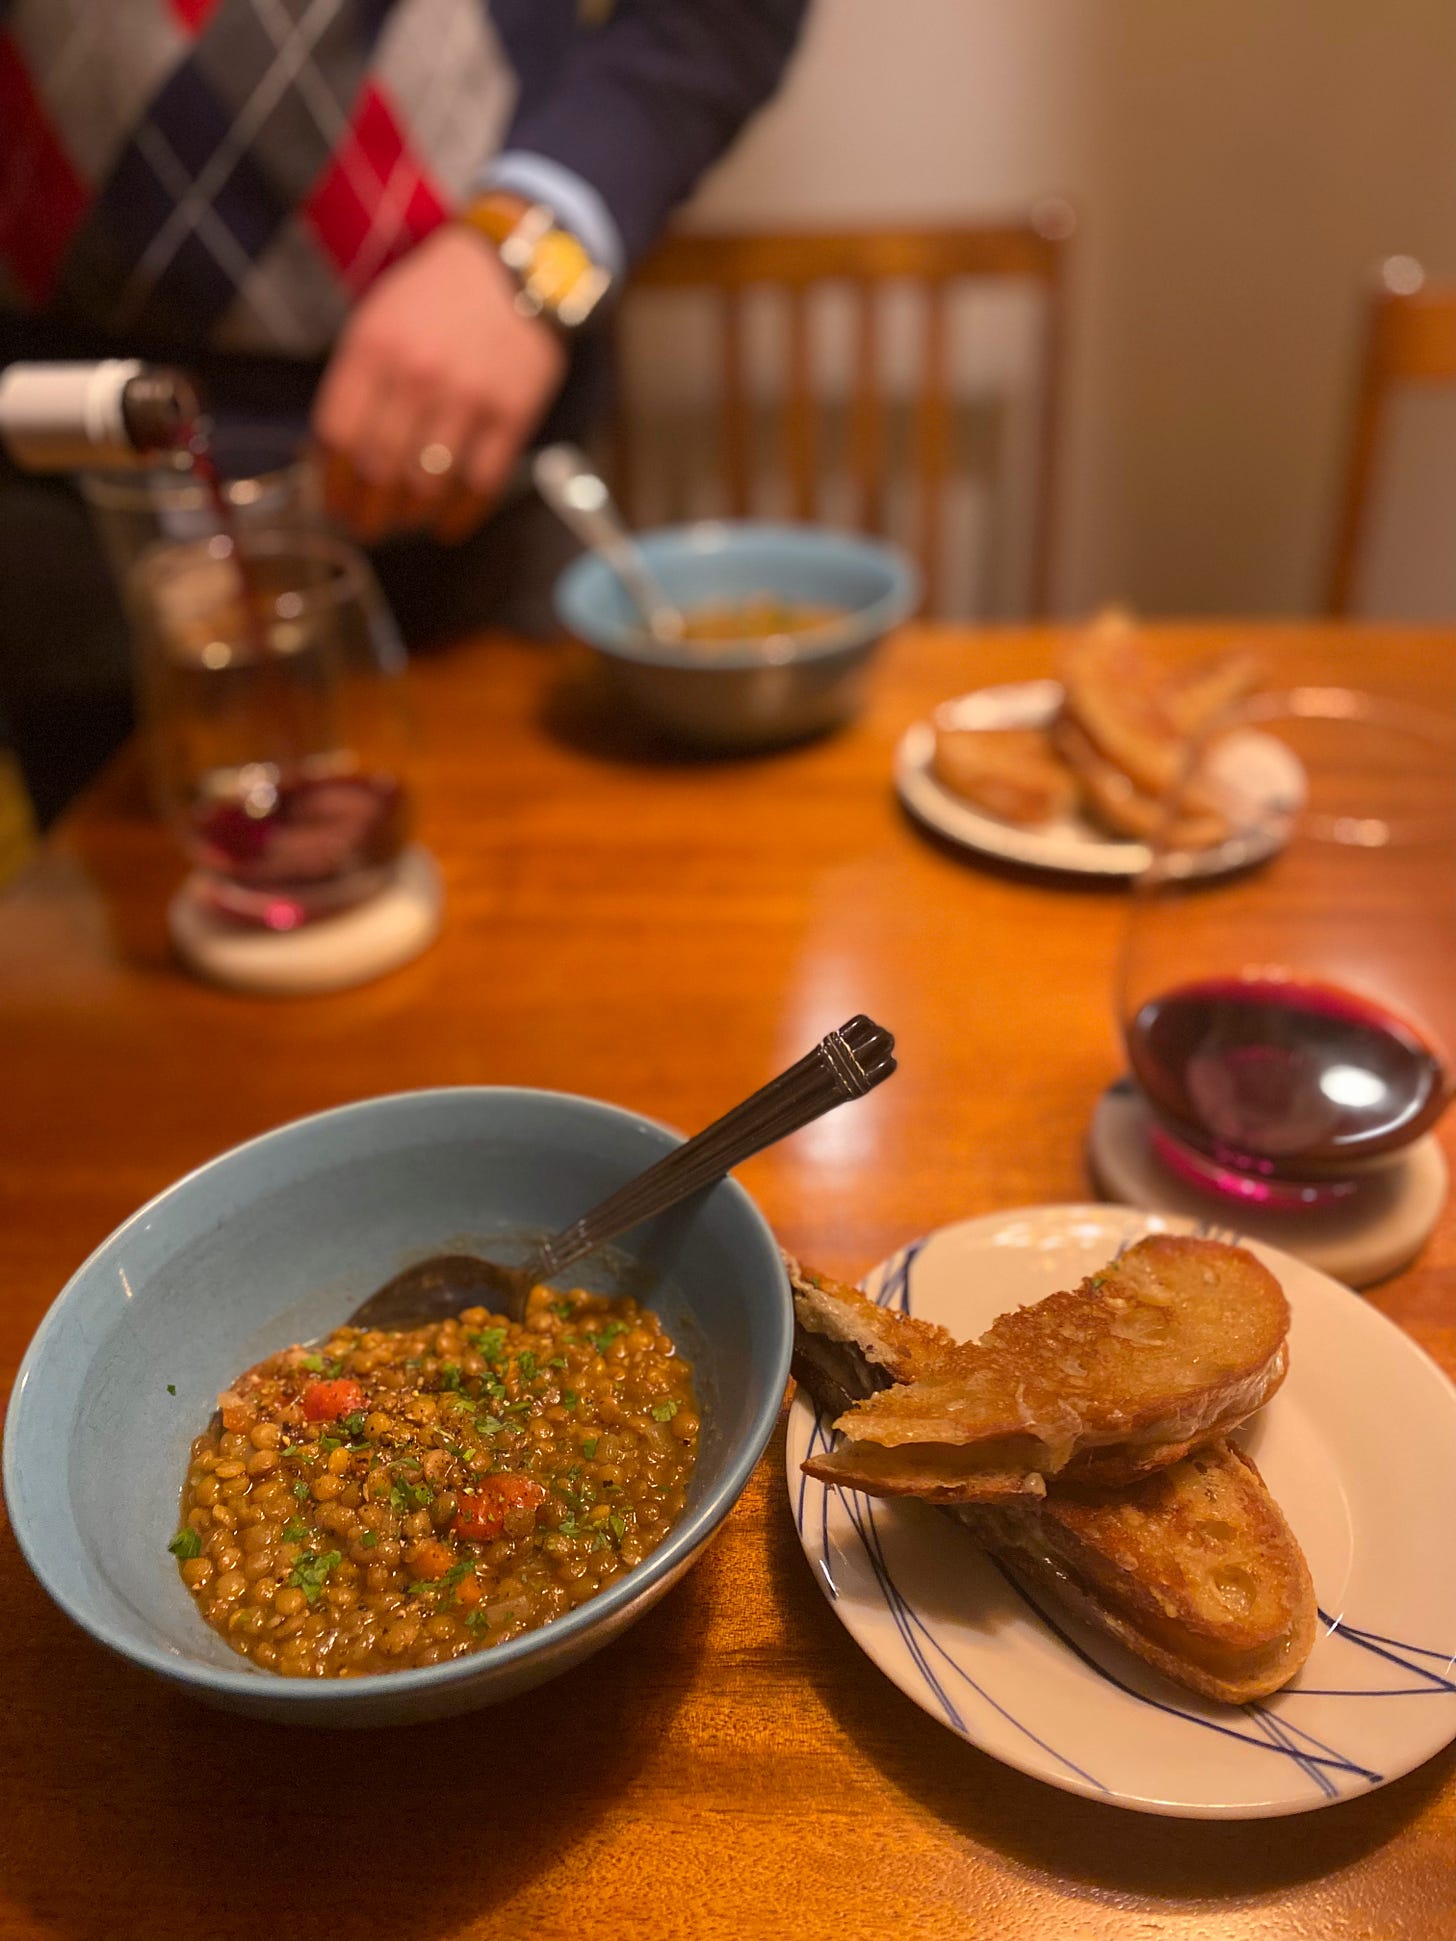 A blue bowl of chunky lentil soup next to a small plate with a grilled cheese sandwich. In the background, Jeff pours red wine into a stemless glass.